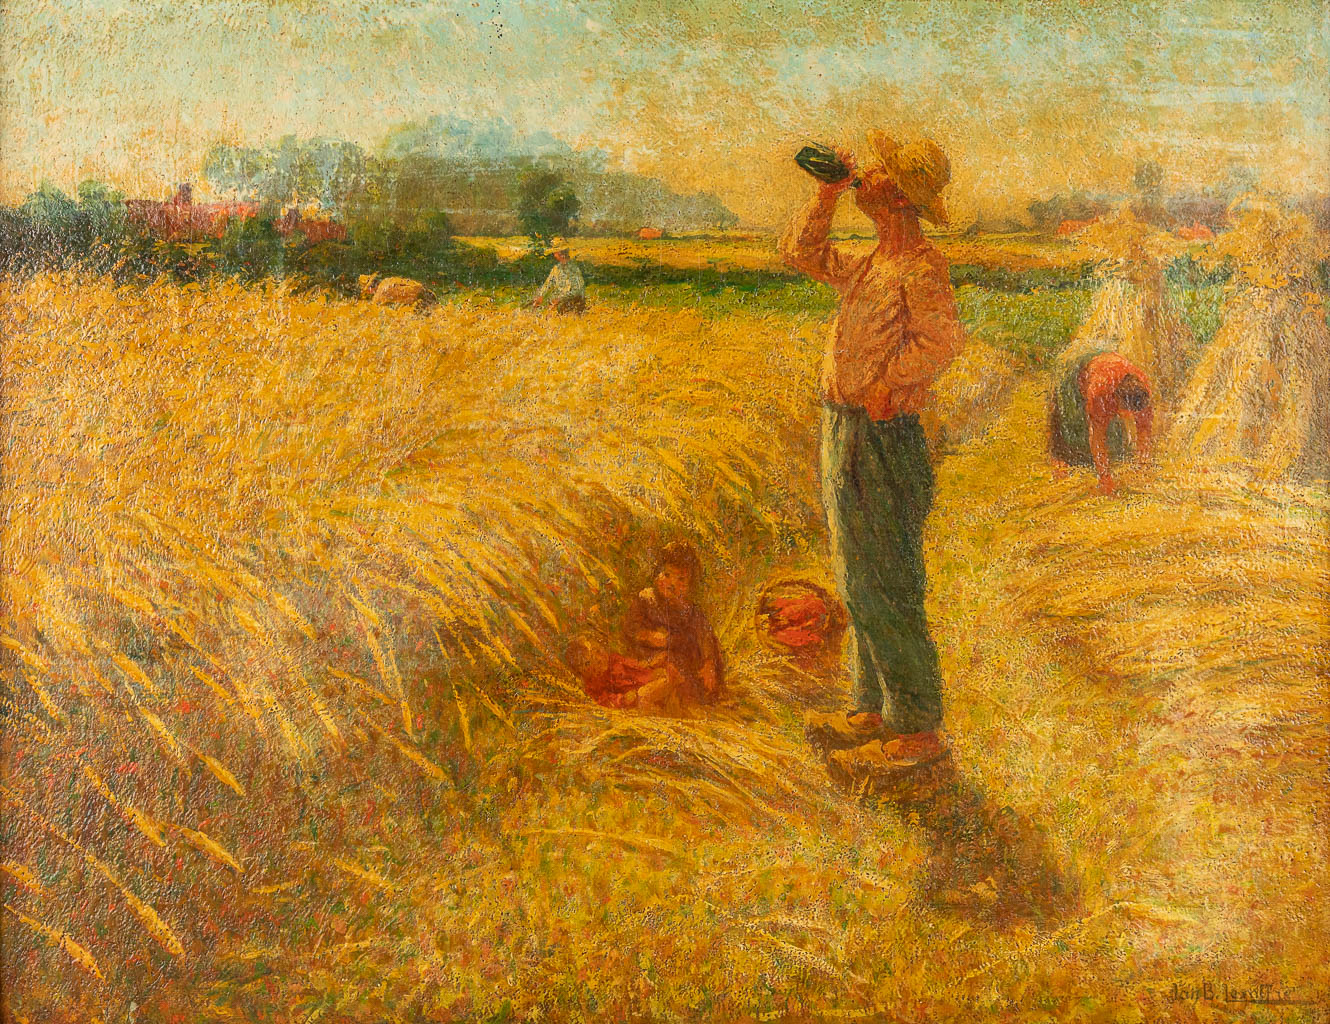 Jan-Baptist LESAFFRE (1864-1926) 'Farmer and family in the field' oil on panel. (W:90 x H:70 cm)